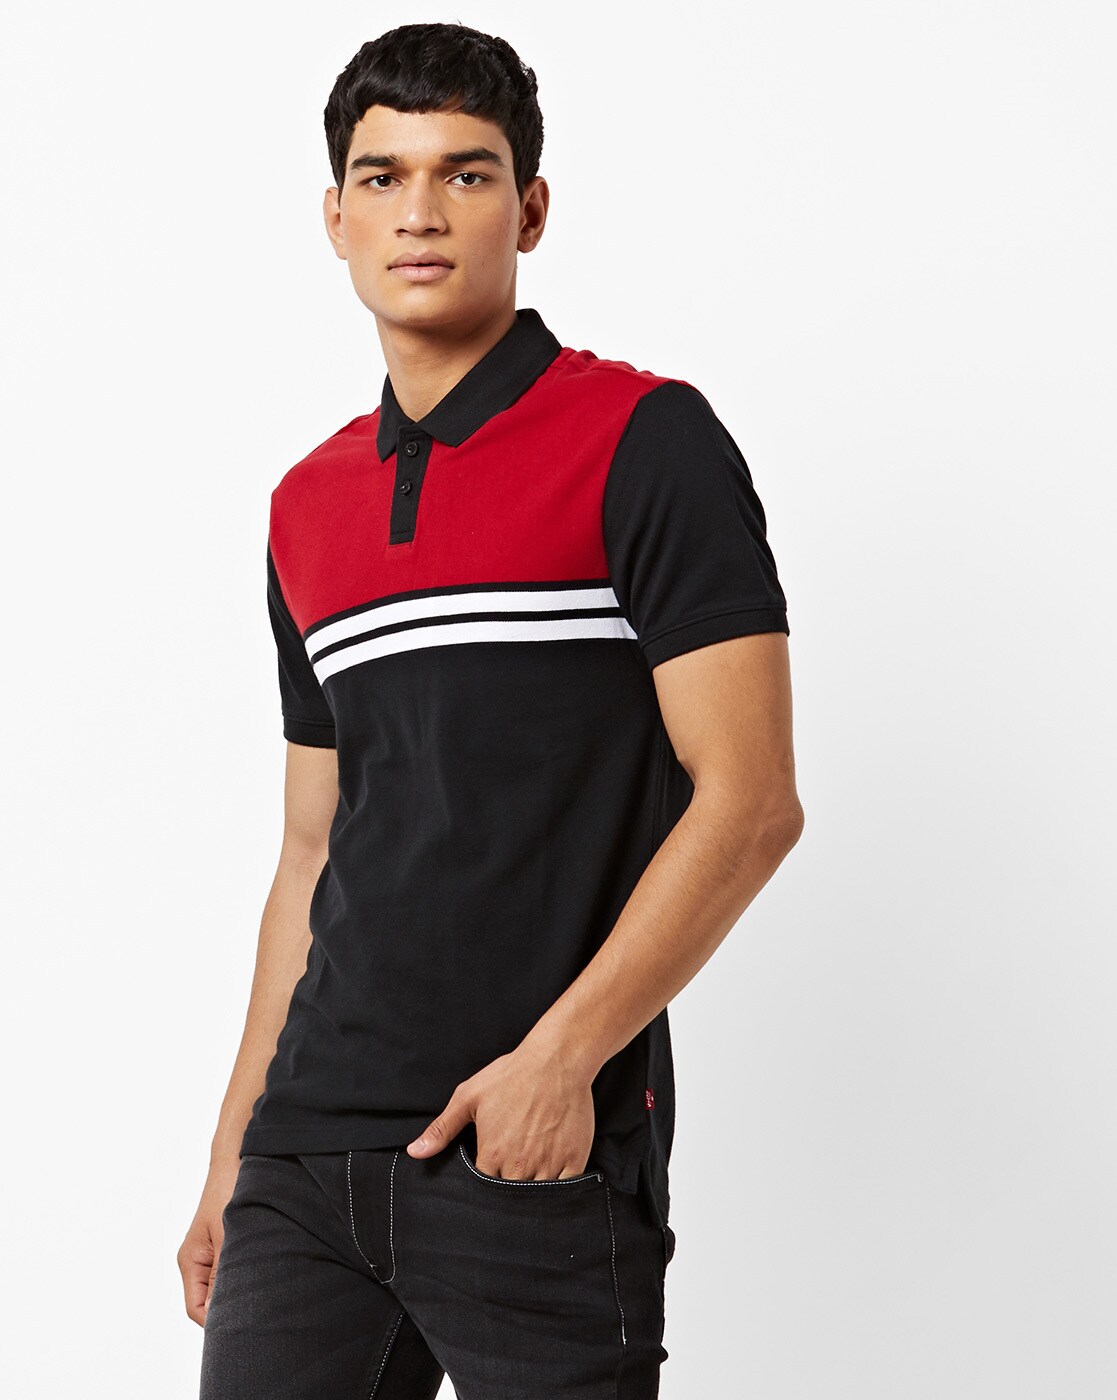 levi's black and red t shirt